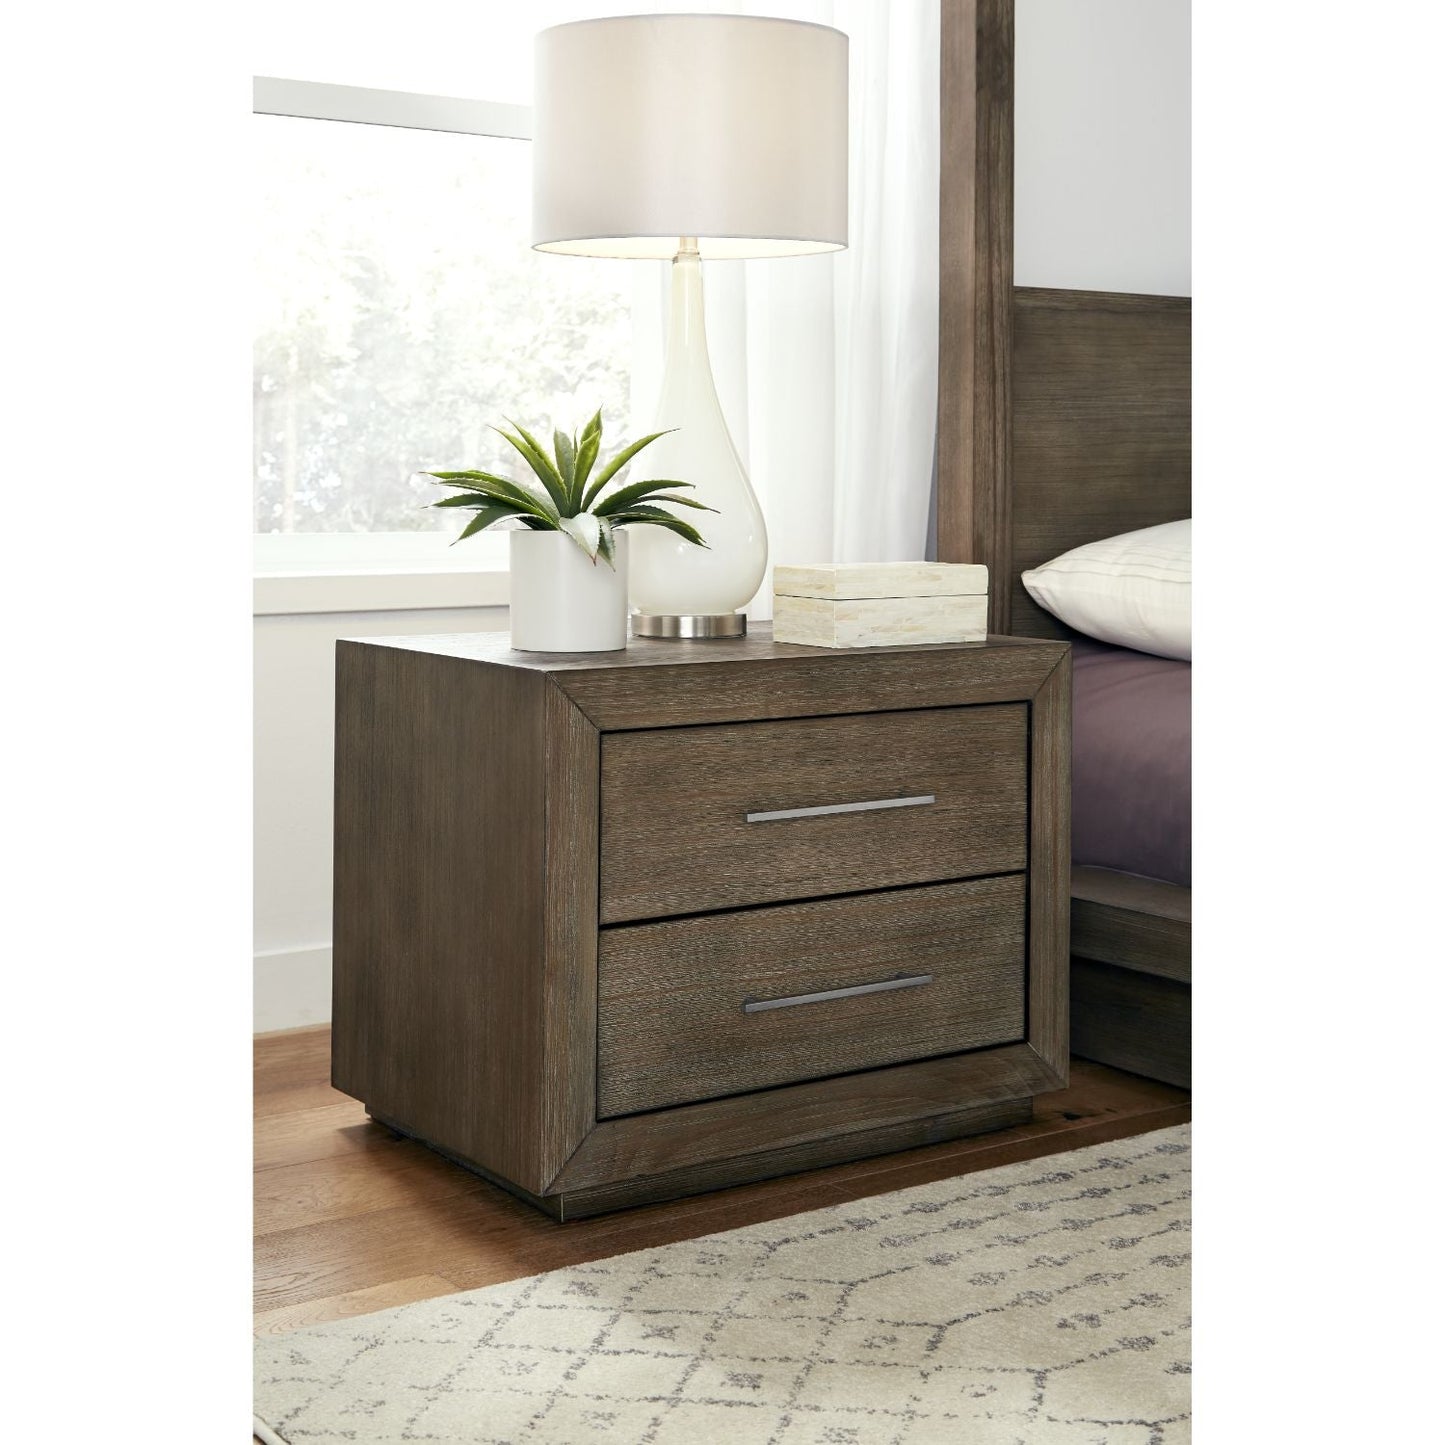 Modus Melbourne Two Drawer Nightstand with USB in Dark Pine